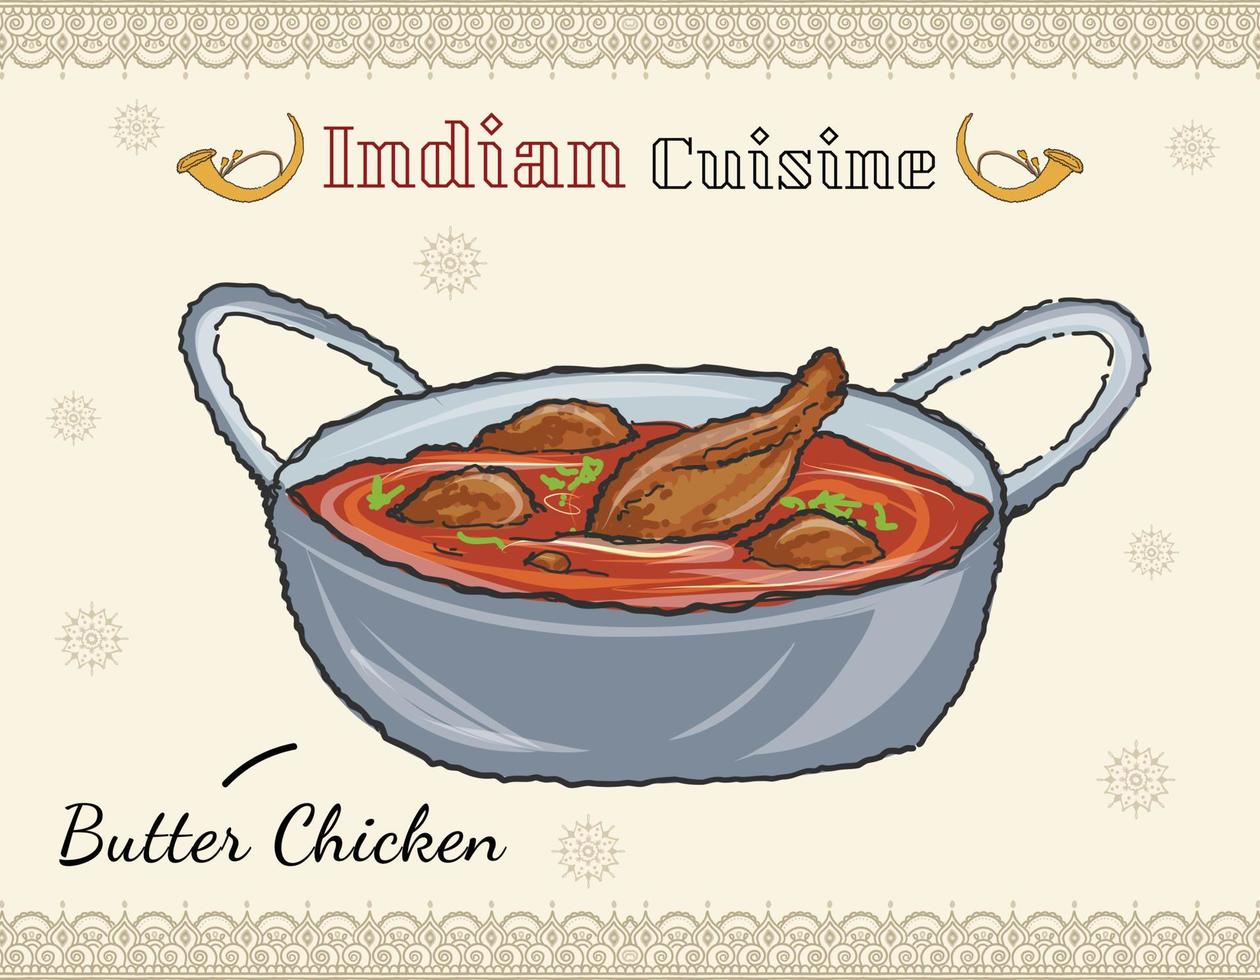 Traditional Indian food, meat in spiced tomato sauce. Indian food of chicken butter with Nan bread and lemon slice. Restaurant or Dhaba Menu Illustration. vector